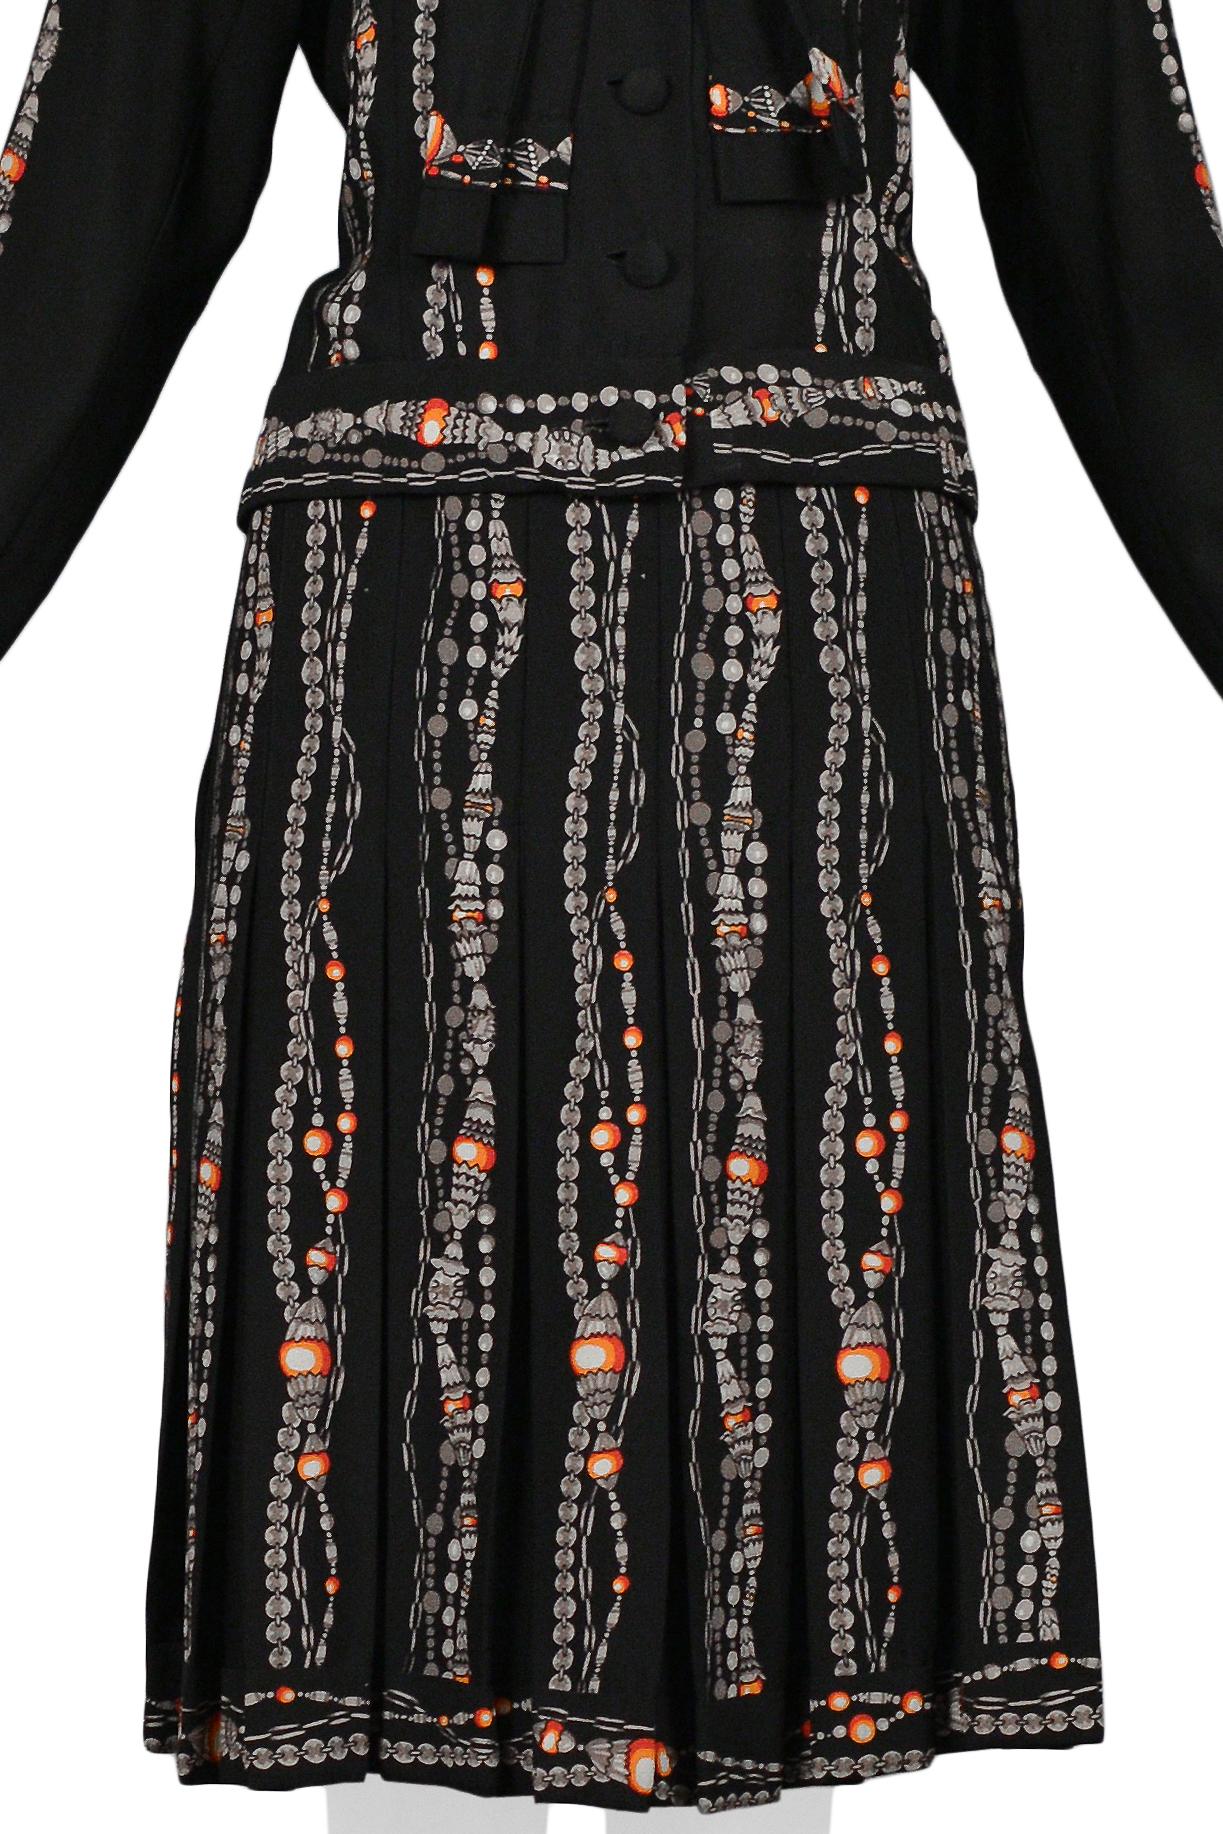 Chanel Black Skirt Suit With Iconic Bead & Pearl Necklace Print For Sale 2